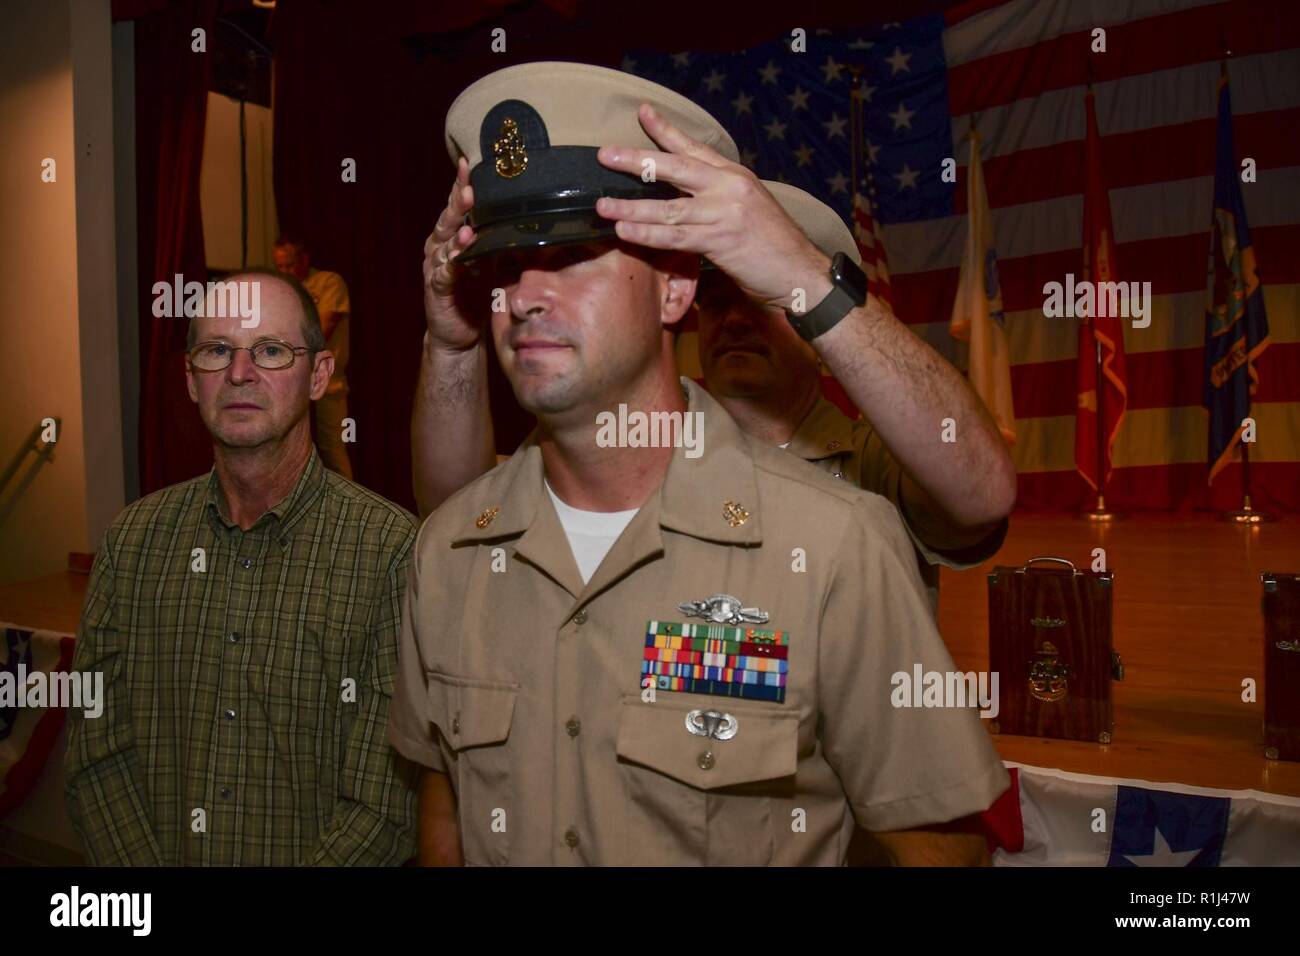 PORTSMOUTH, Va. (Sept. 21, 2018) – Chief Navy Counselor Michael Tate ...